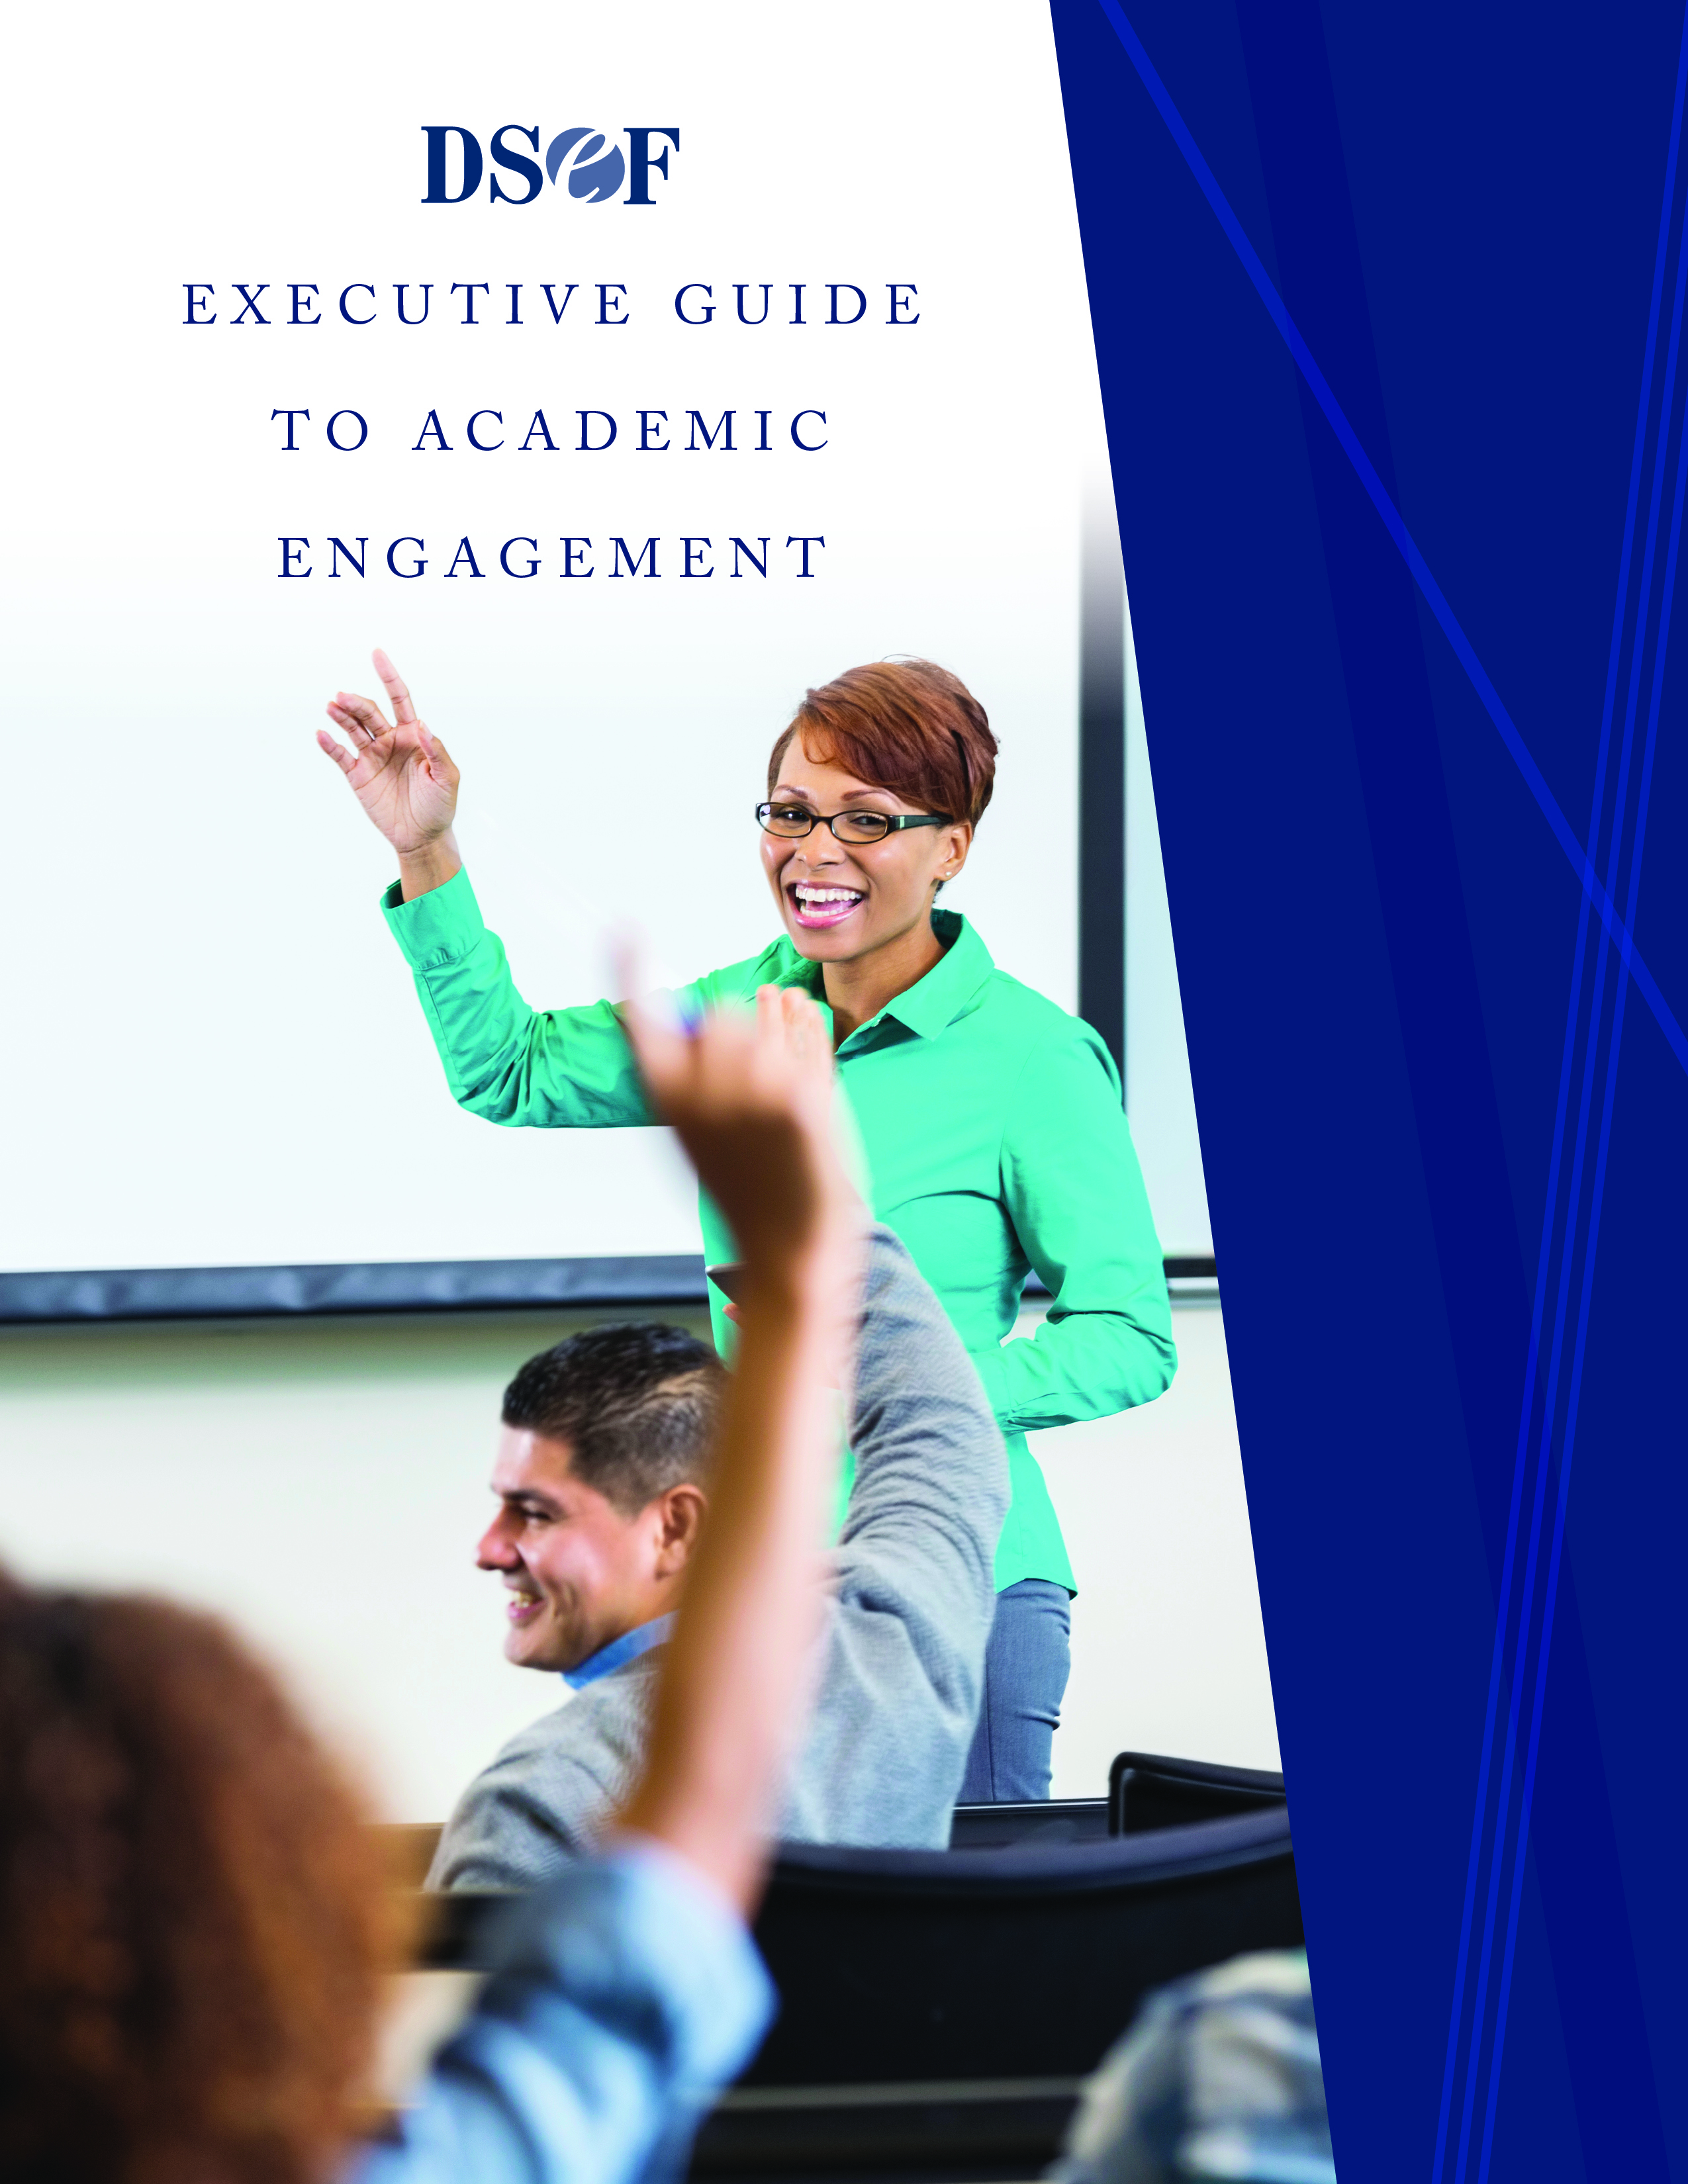 The Executive Guide to Academic Engagement